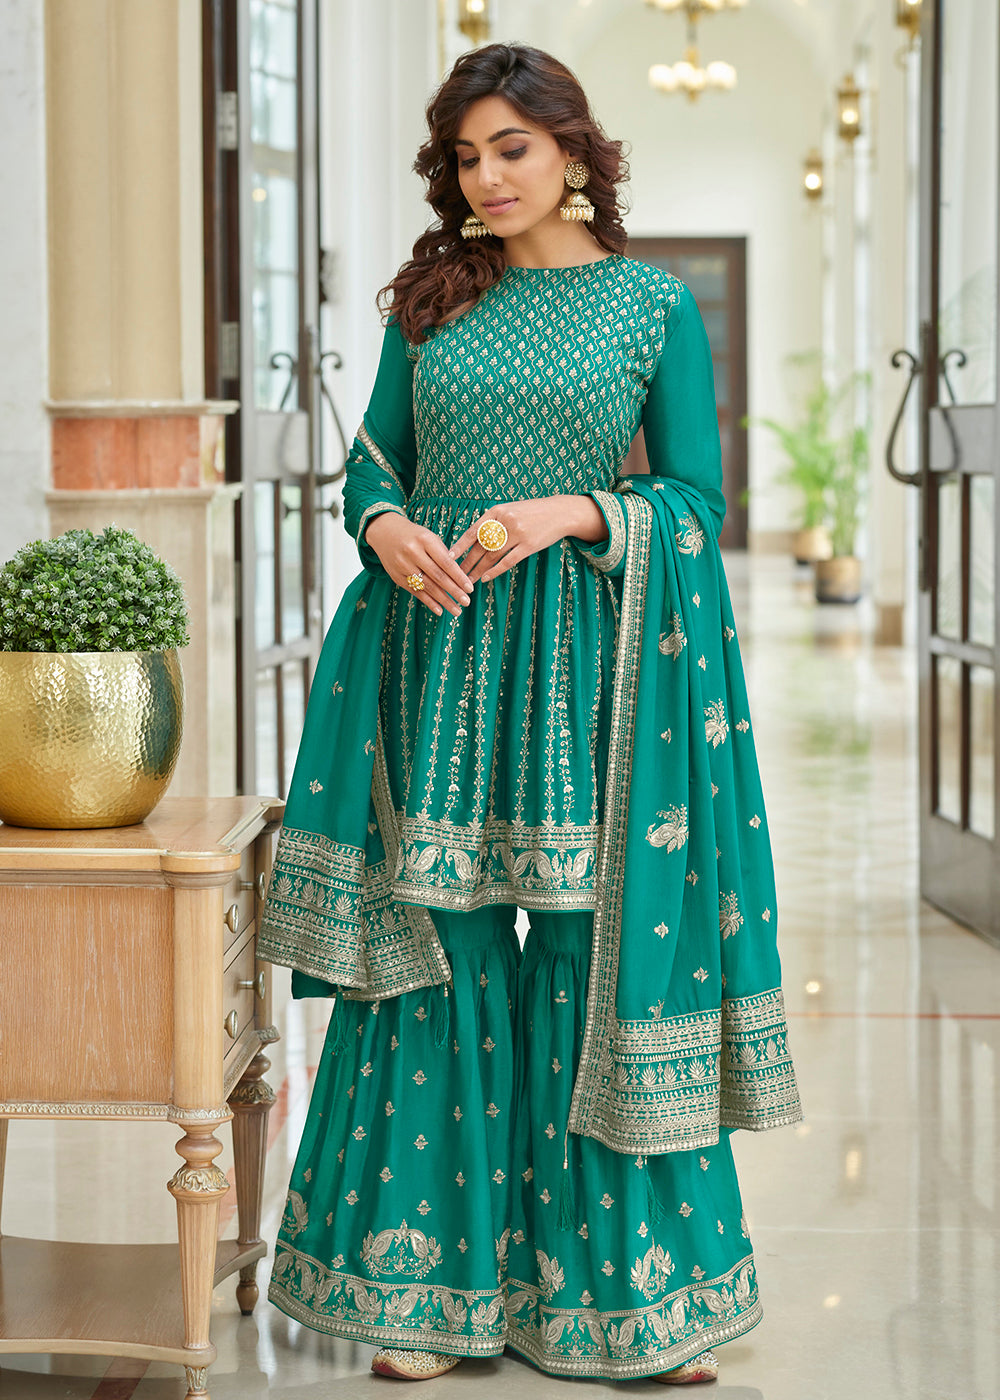 Shop Now Heavy Chinon Turquoise Sequins Festive Gharara Suit Online at Empress Clothing in USA, UK, Canada, Germany & Worldwide.